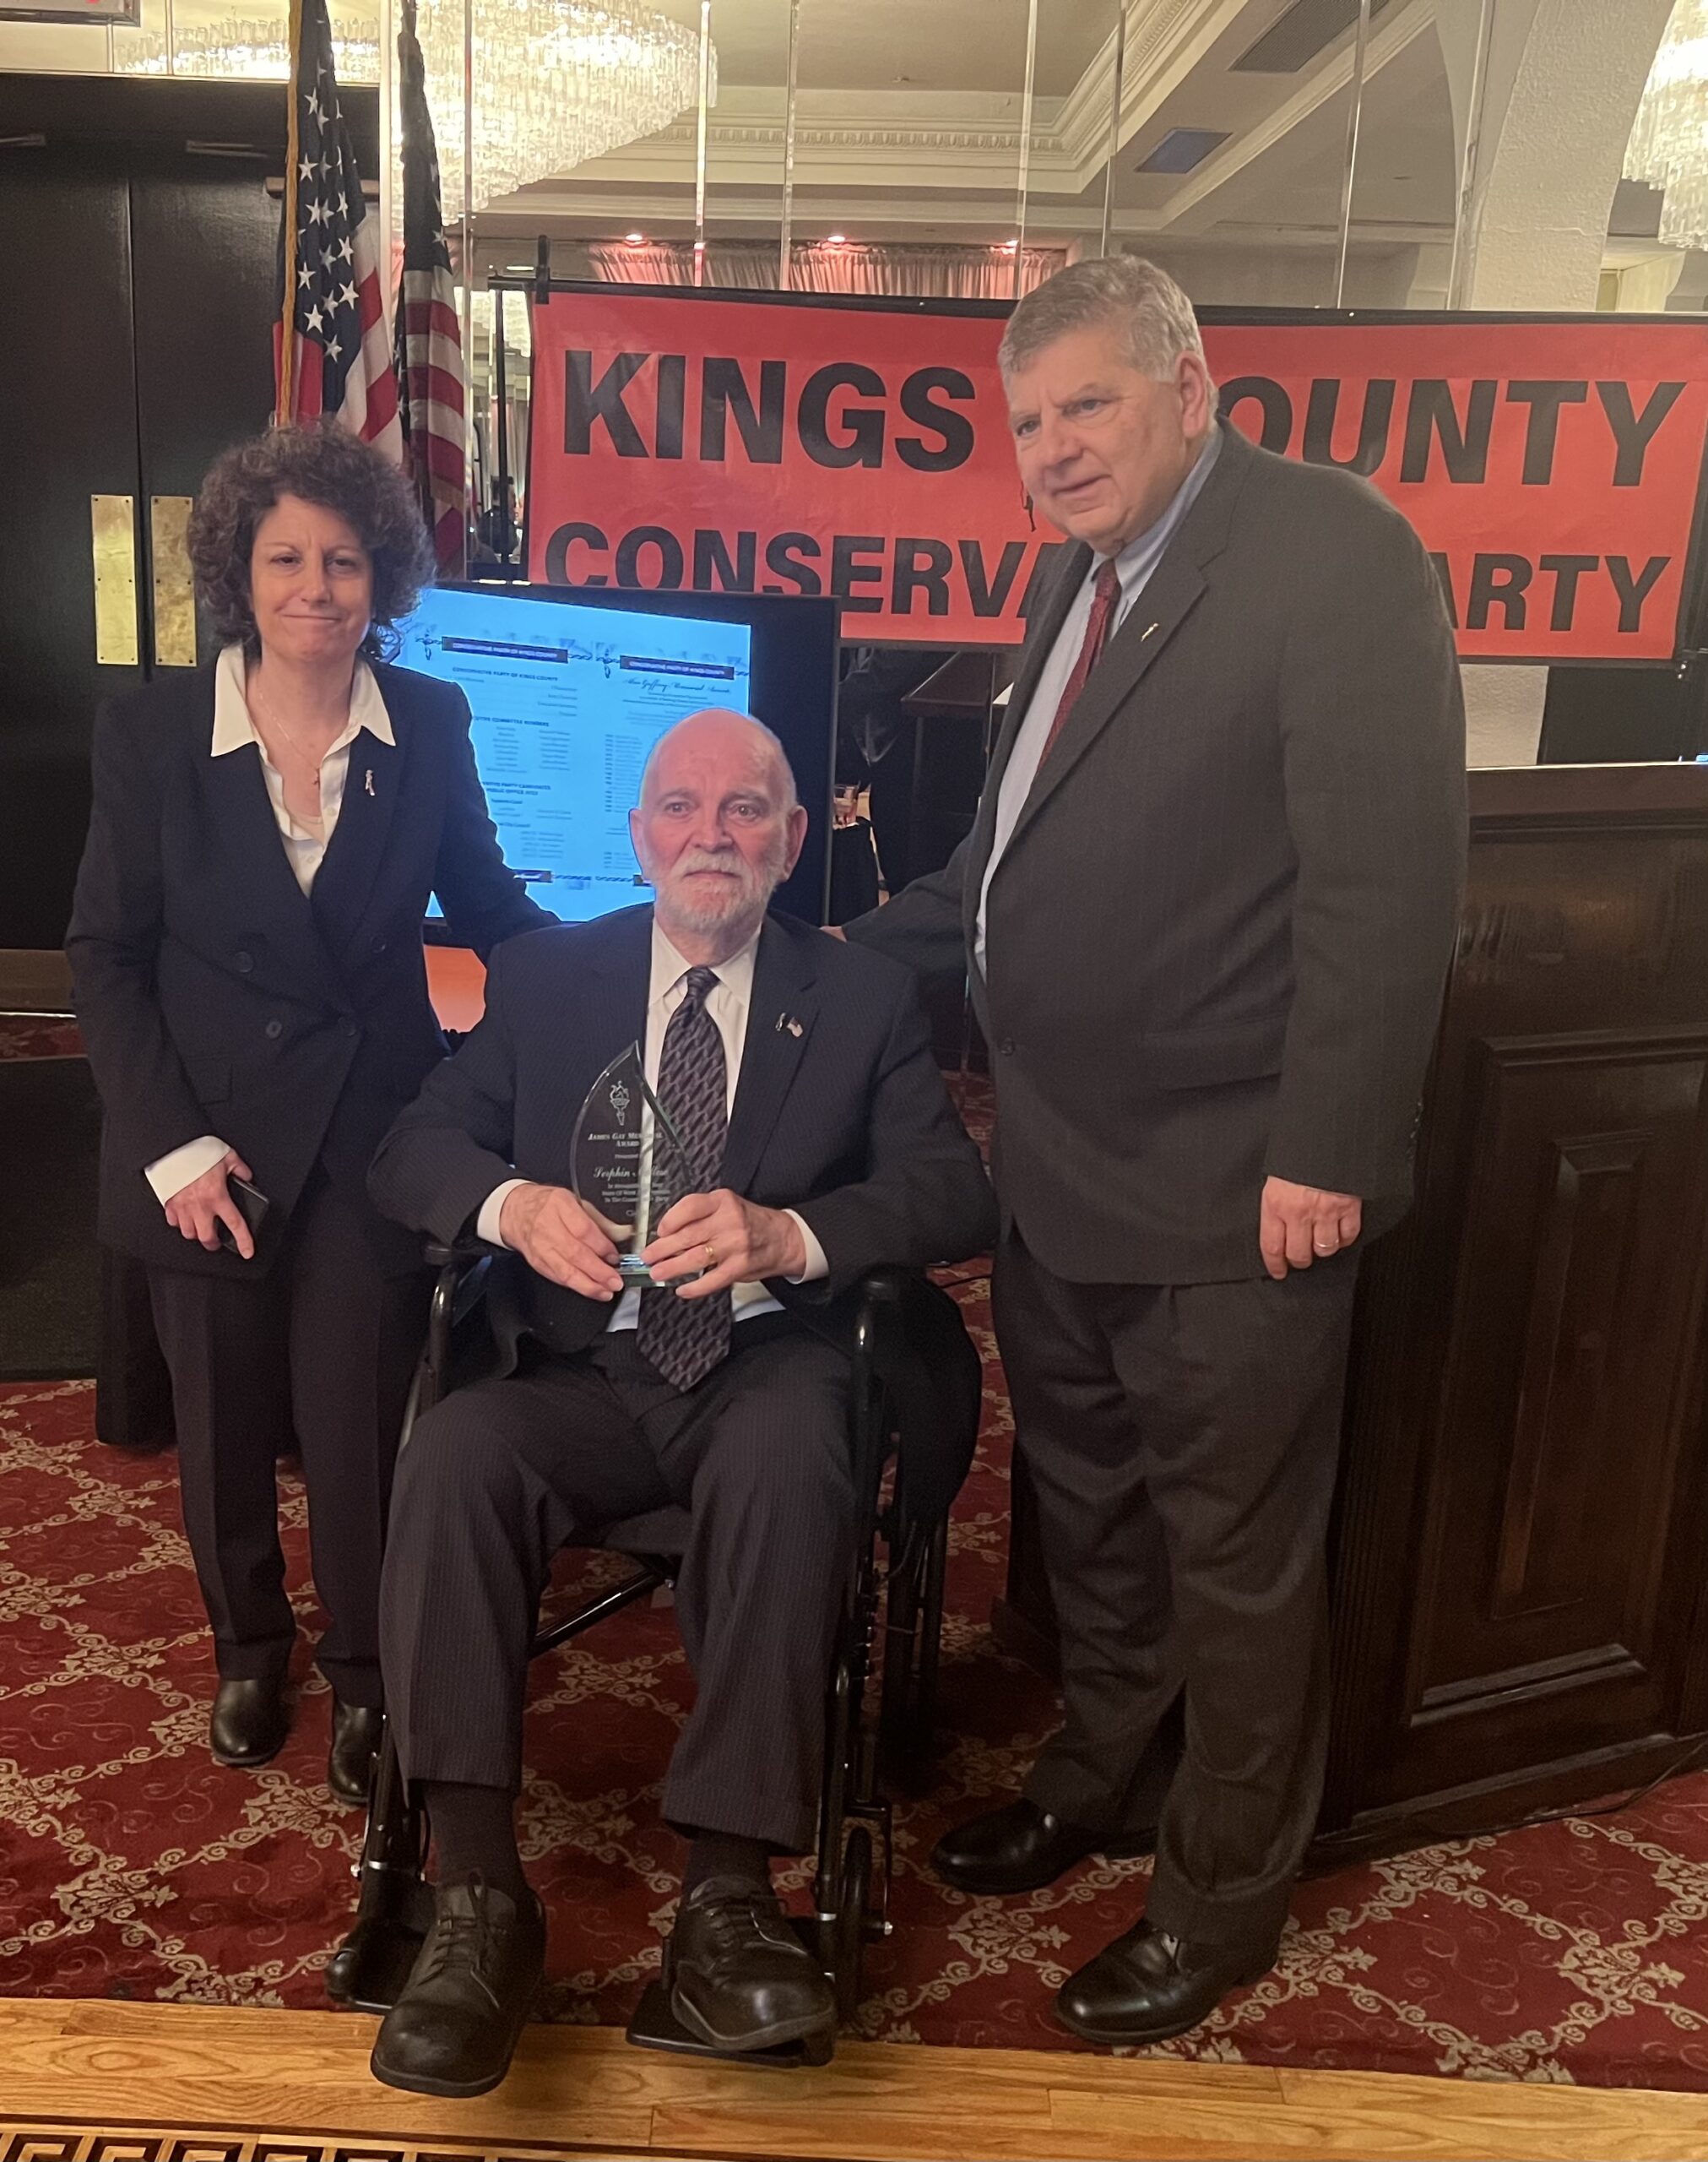 (From left) Fran Vella-Marrone, chairwoman, Kings County Conservative Party; former State Sen. Serphin Maltese, recipient of the Jim Gay Award; and Jerry Kassar, chairman, New York State Conservative Party (From left) Fran Vella-Marrone, chairwoman, Kings County Conservative Party; former State Sen. Serphin Maltese, recipient of the Jim Gay Award; and Jerry Kassar, chairman, New York State Conservative Party.